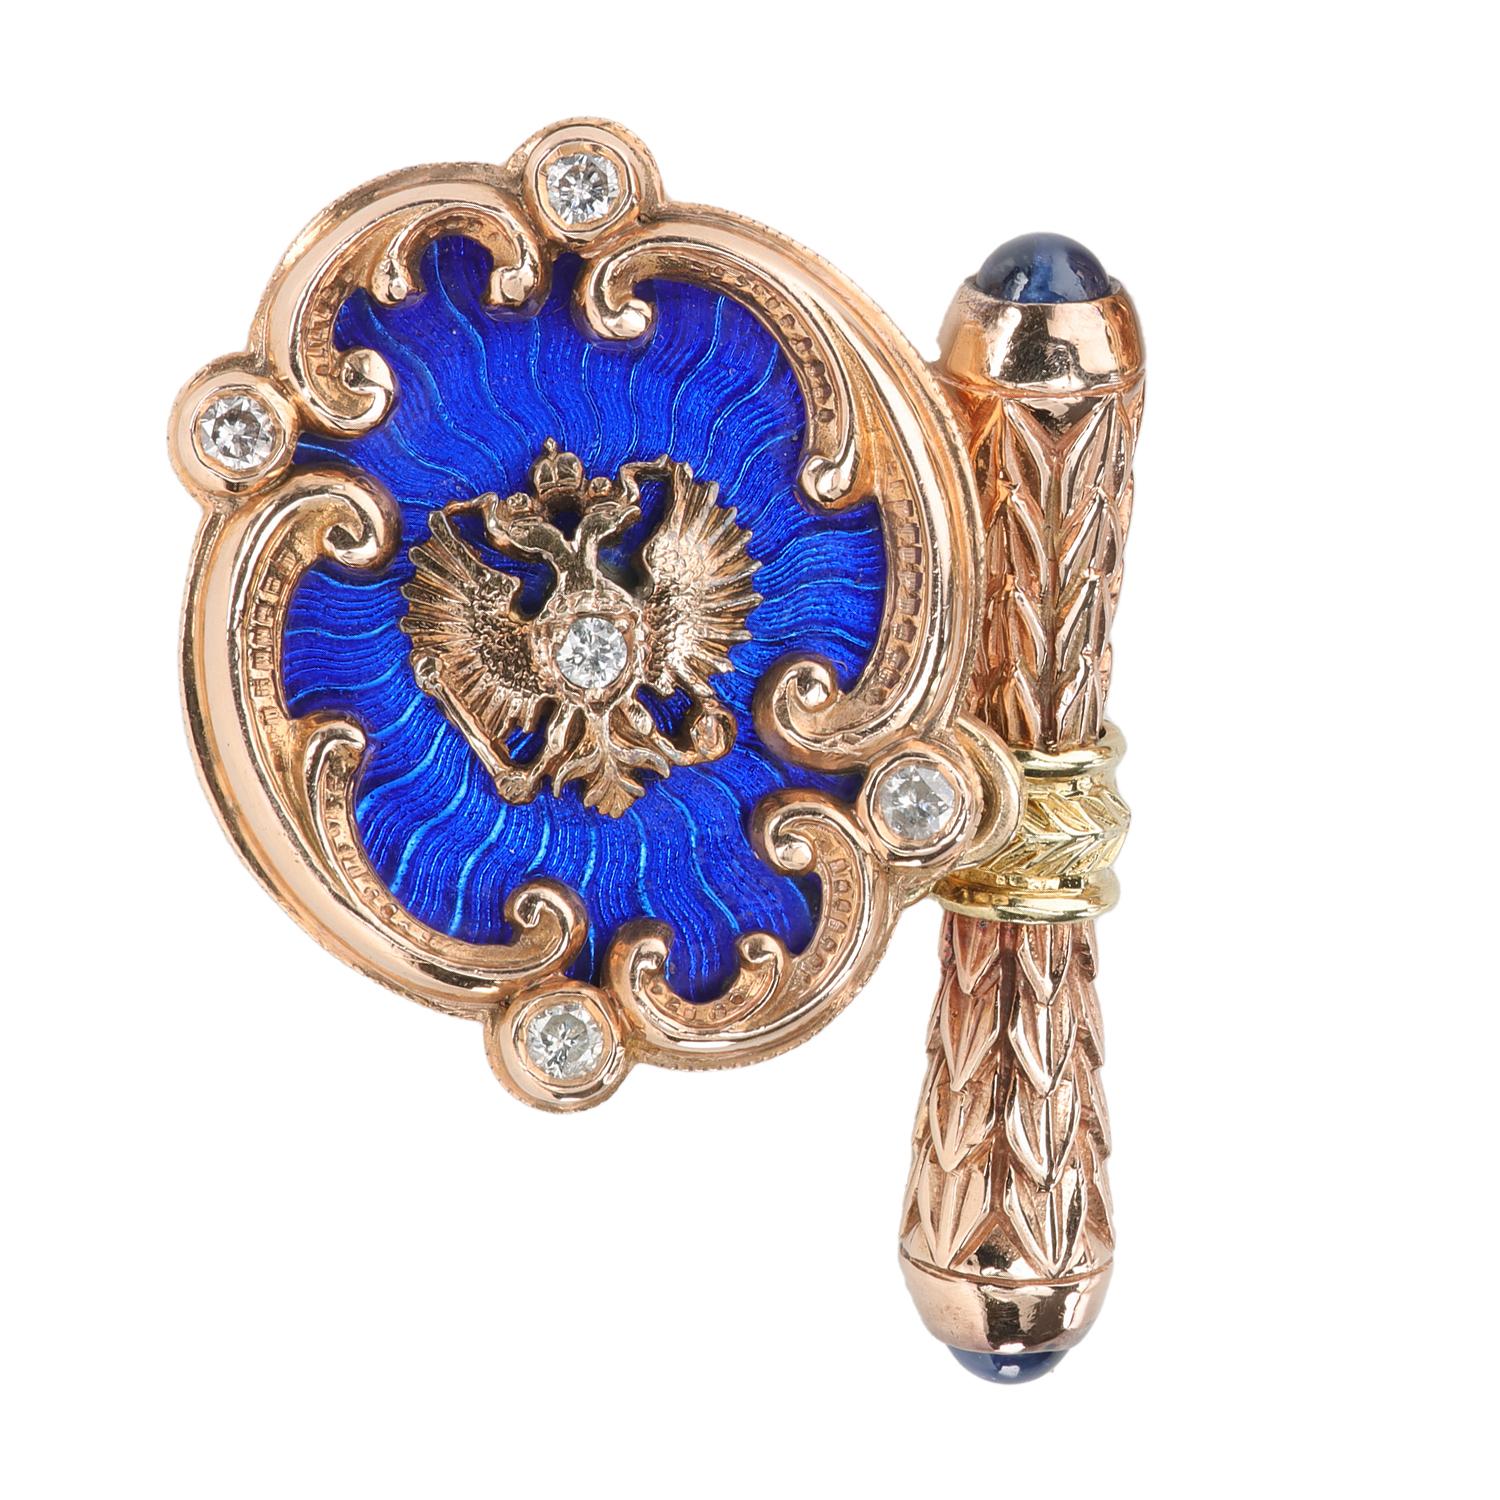 Men's Russian Imperial Style Cufflinks in Rose Gold with Diamond and Sapphires